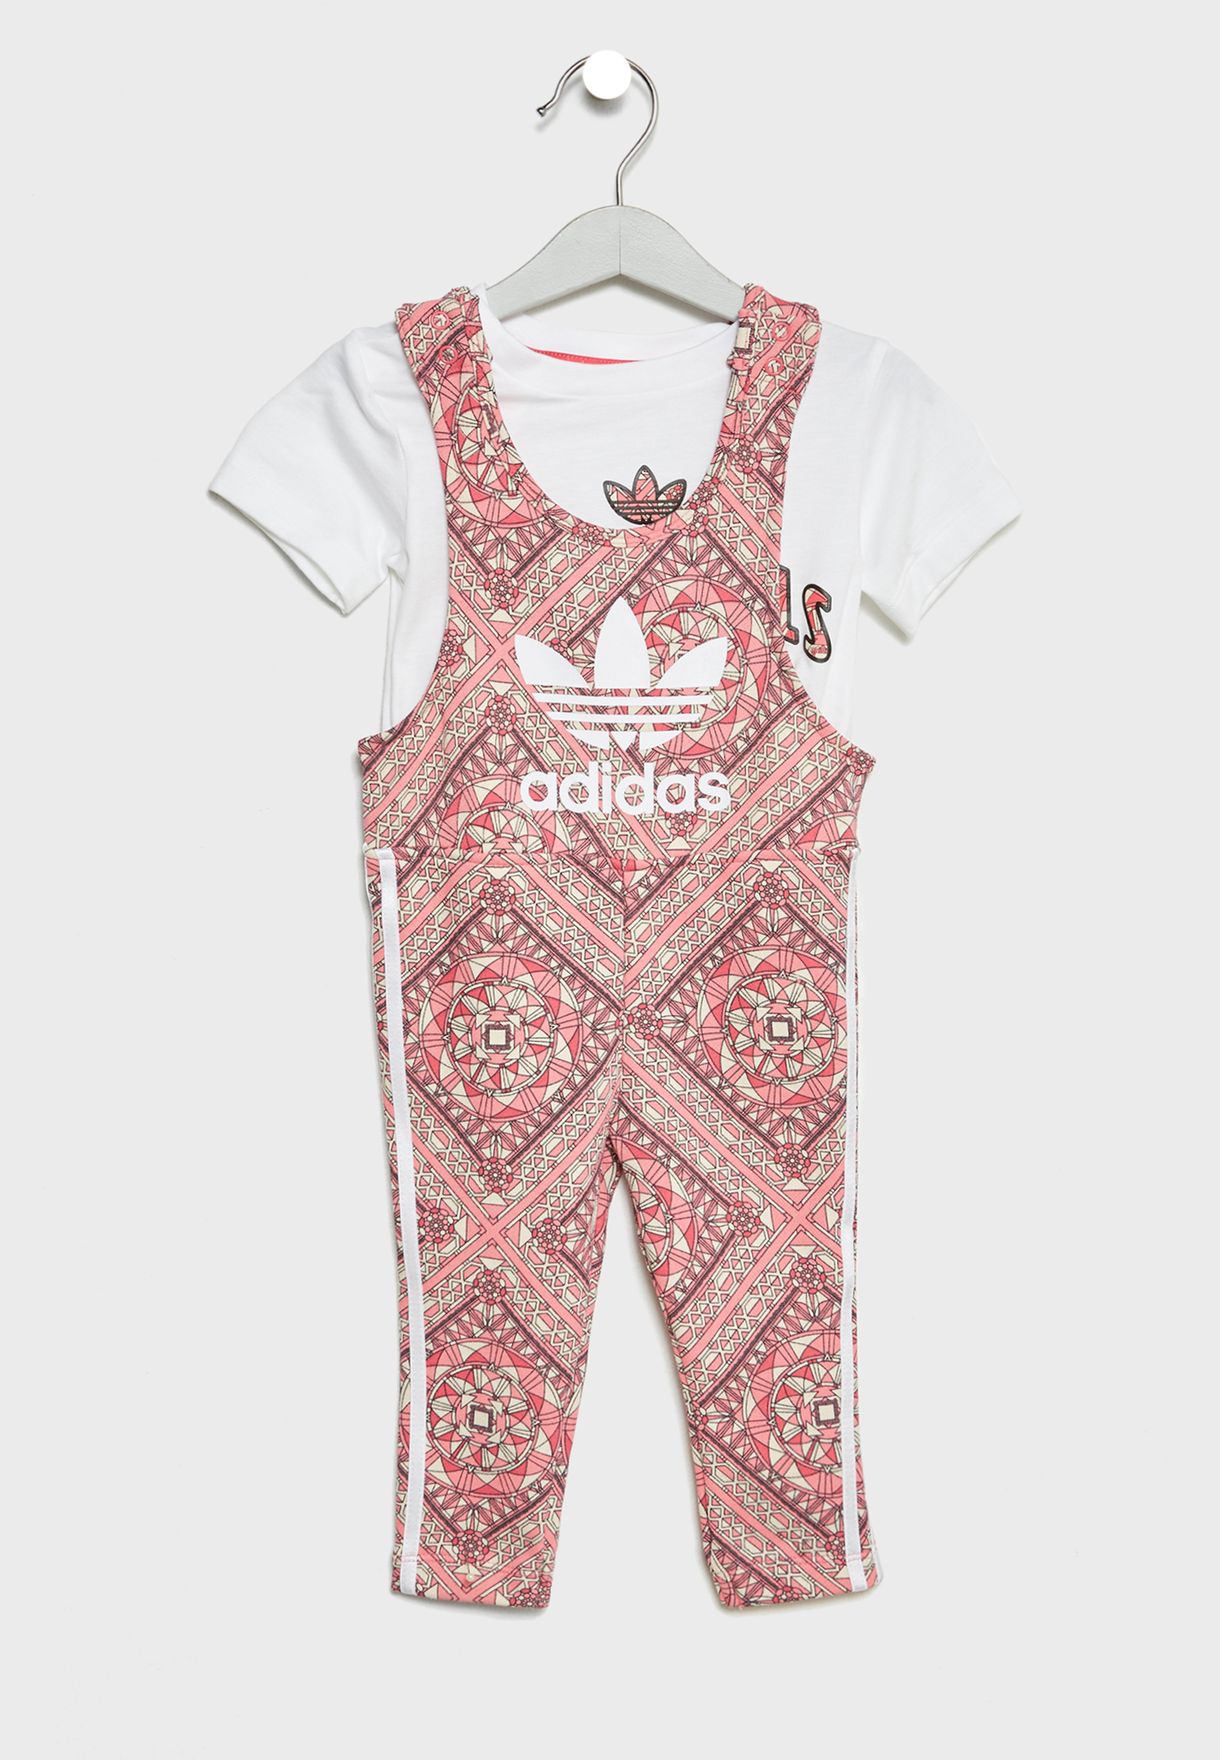 adidas youth jumpsuit